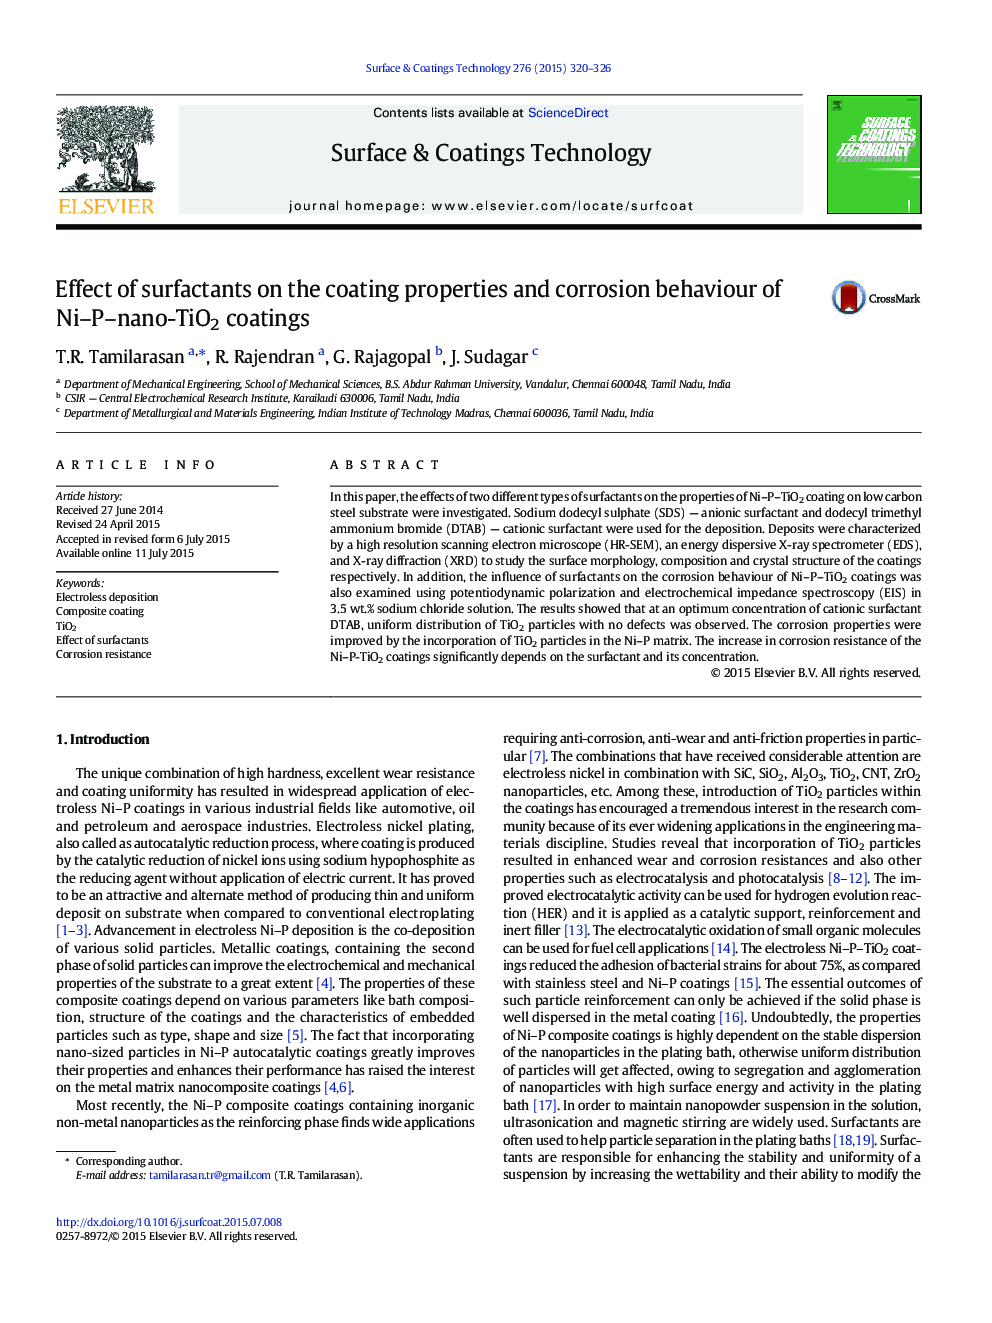 Effect of surfactants on the coating properties and corrosion behaviour of Ni–P–nano-TiO2 coatings